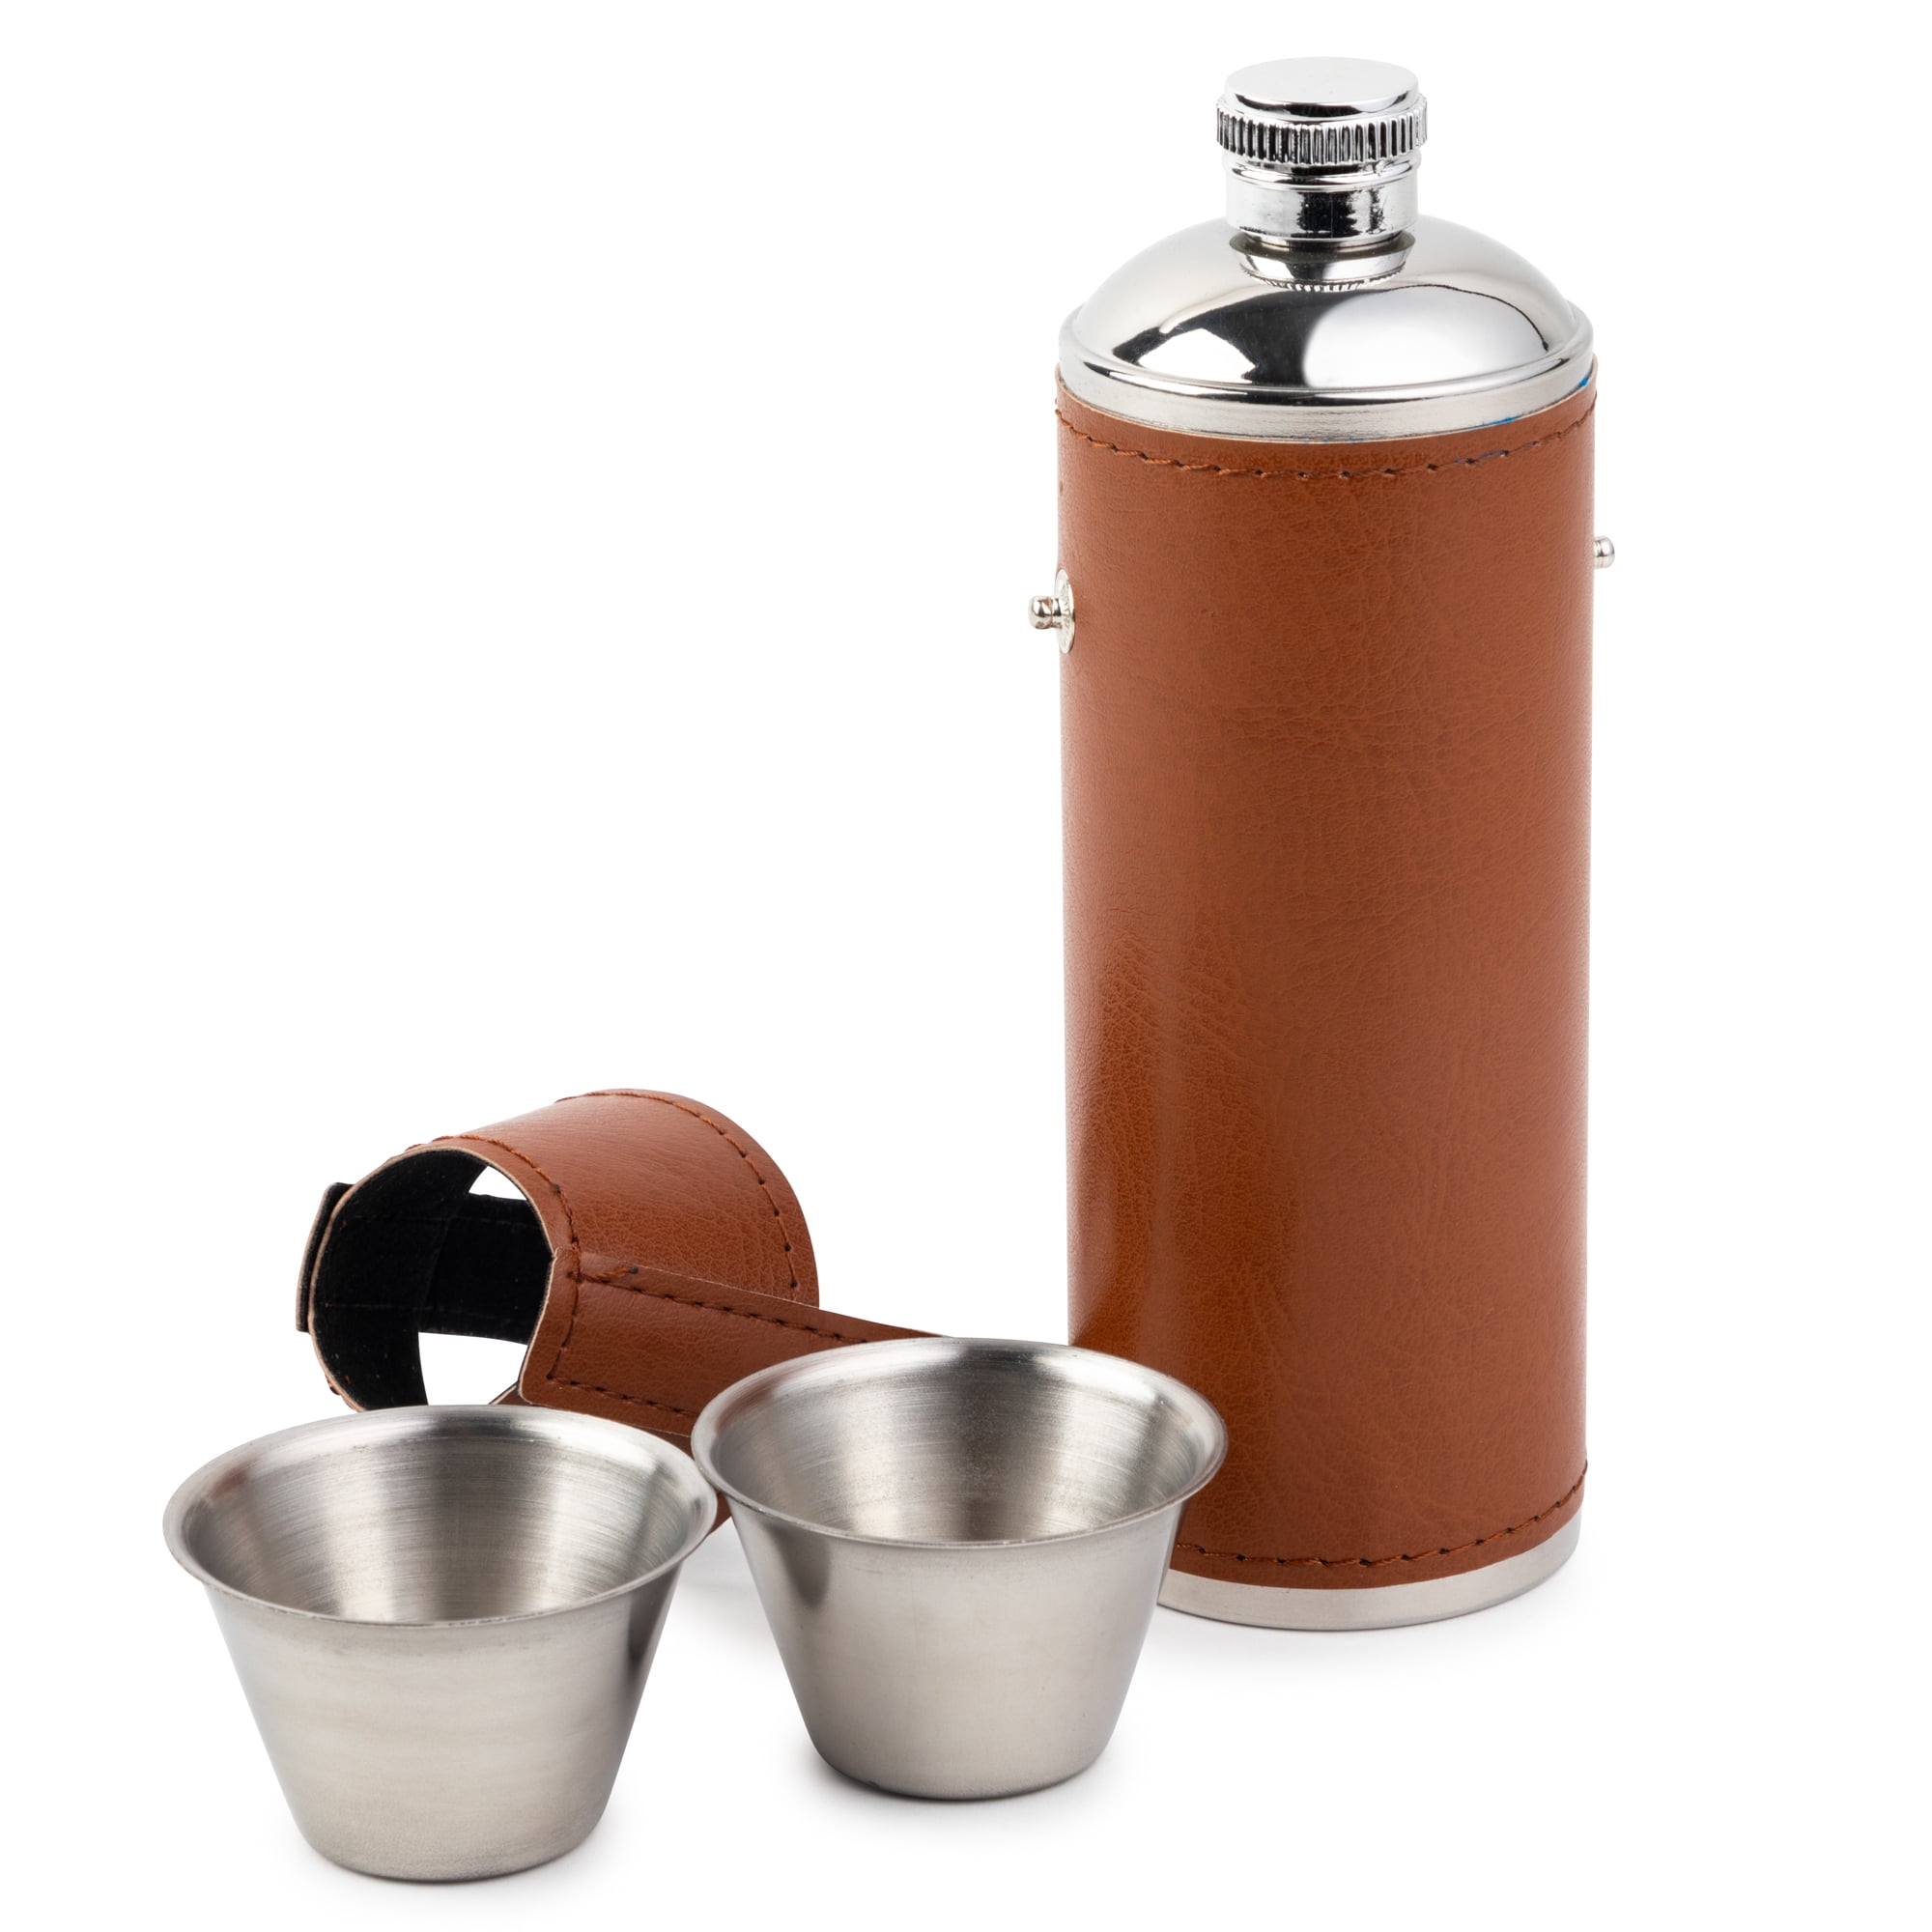 Gift Set with Two Shot Glasses and Funnel 5 oz Round Flask with Window